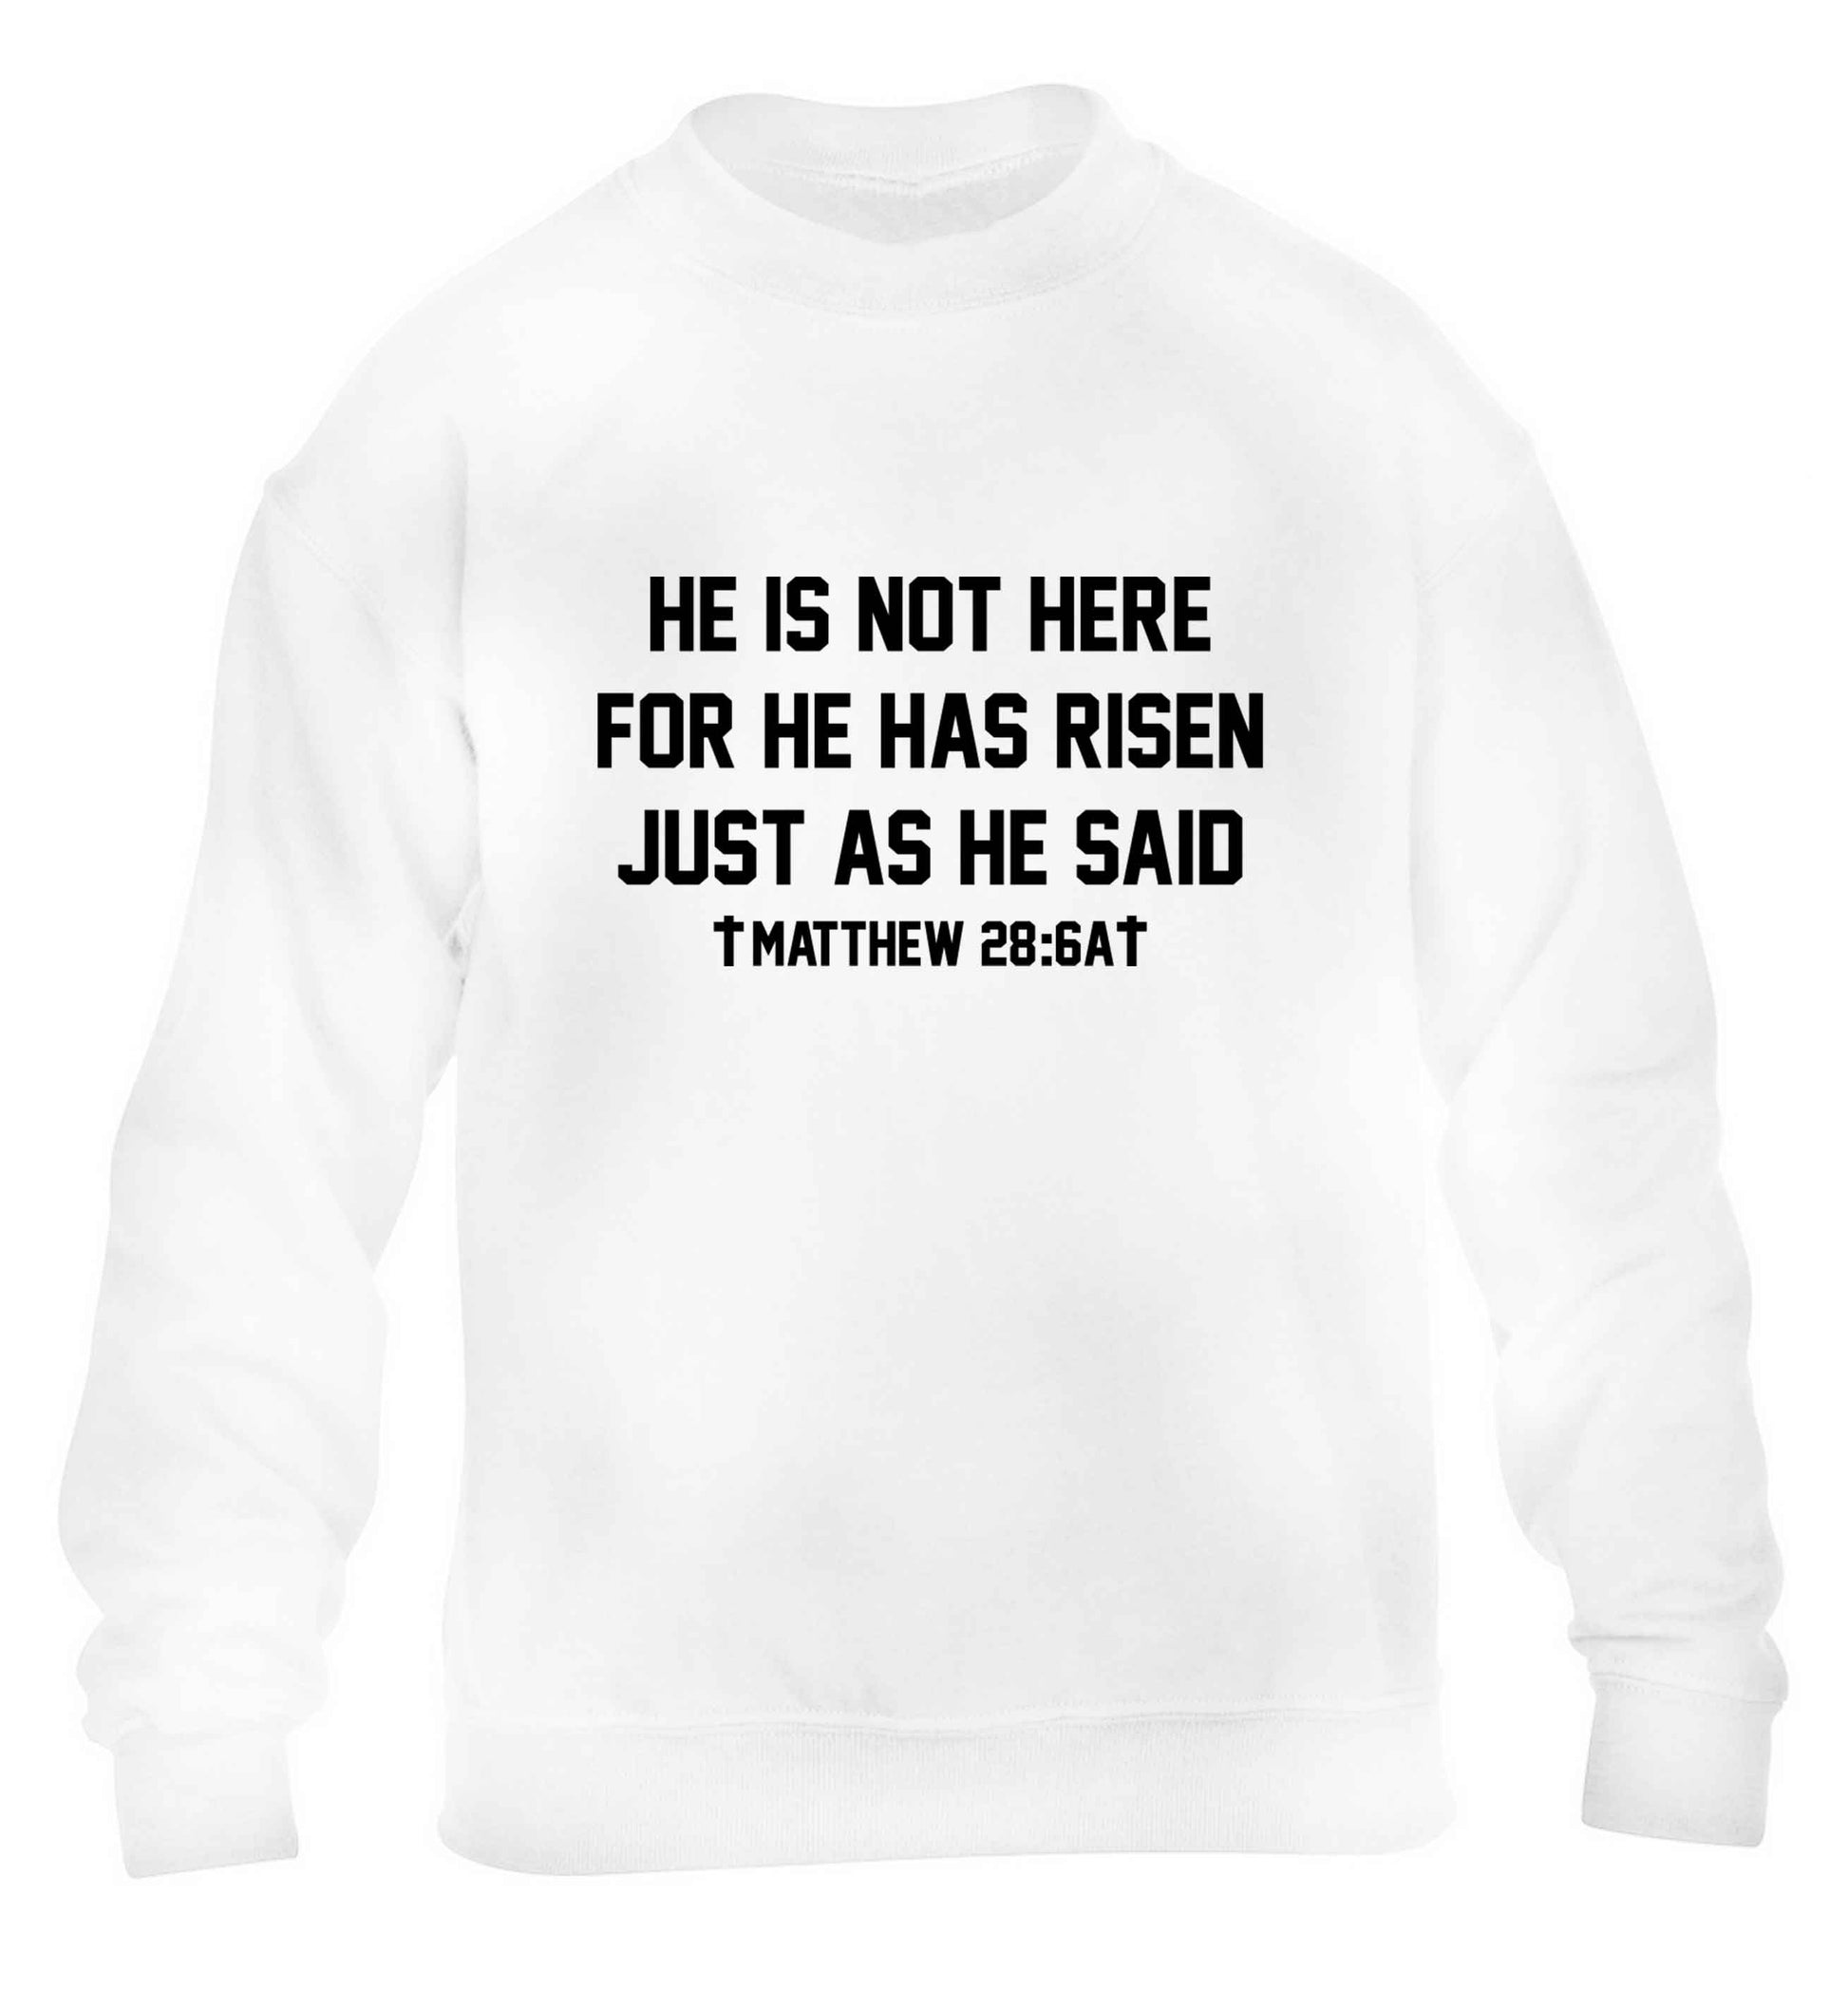 He is not here for he has risen just as he said matthew 28:6A children's white sweater 12-13 Years